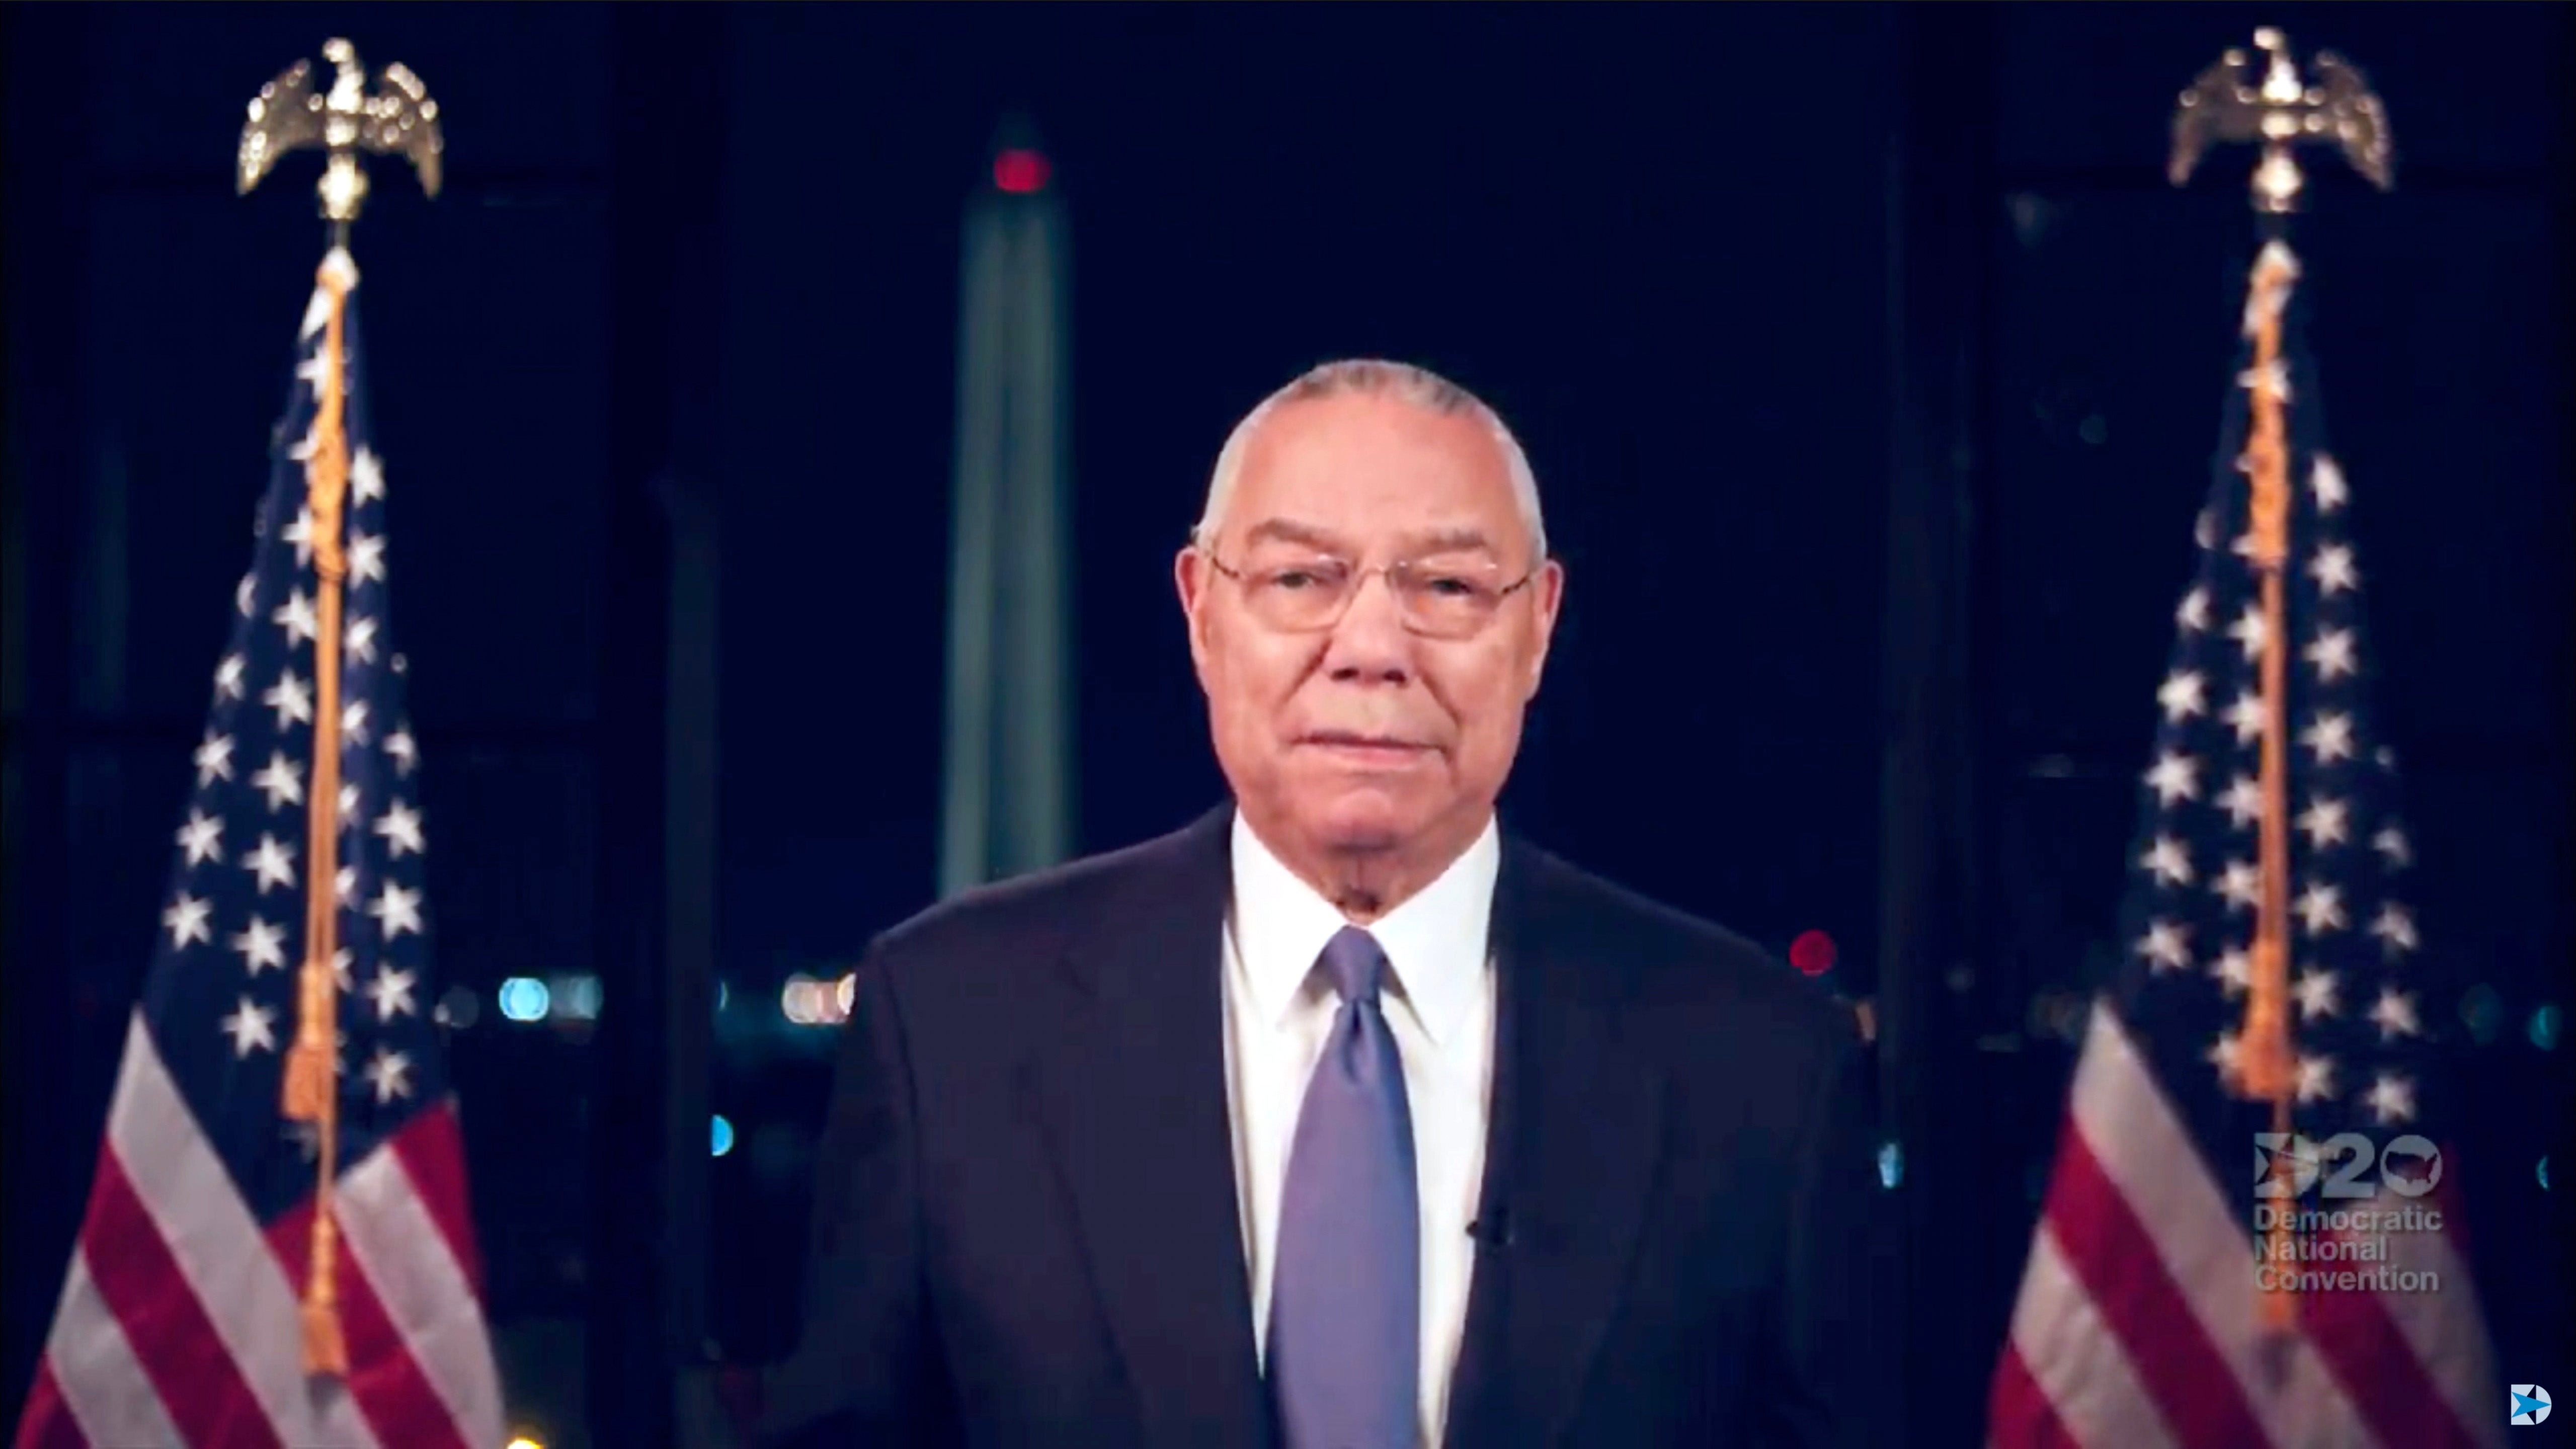 In August 2020 Powell addressed virtual Democratic National Convention in support of Joe Biden